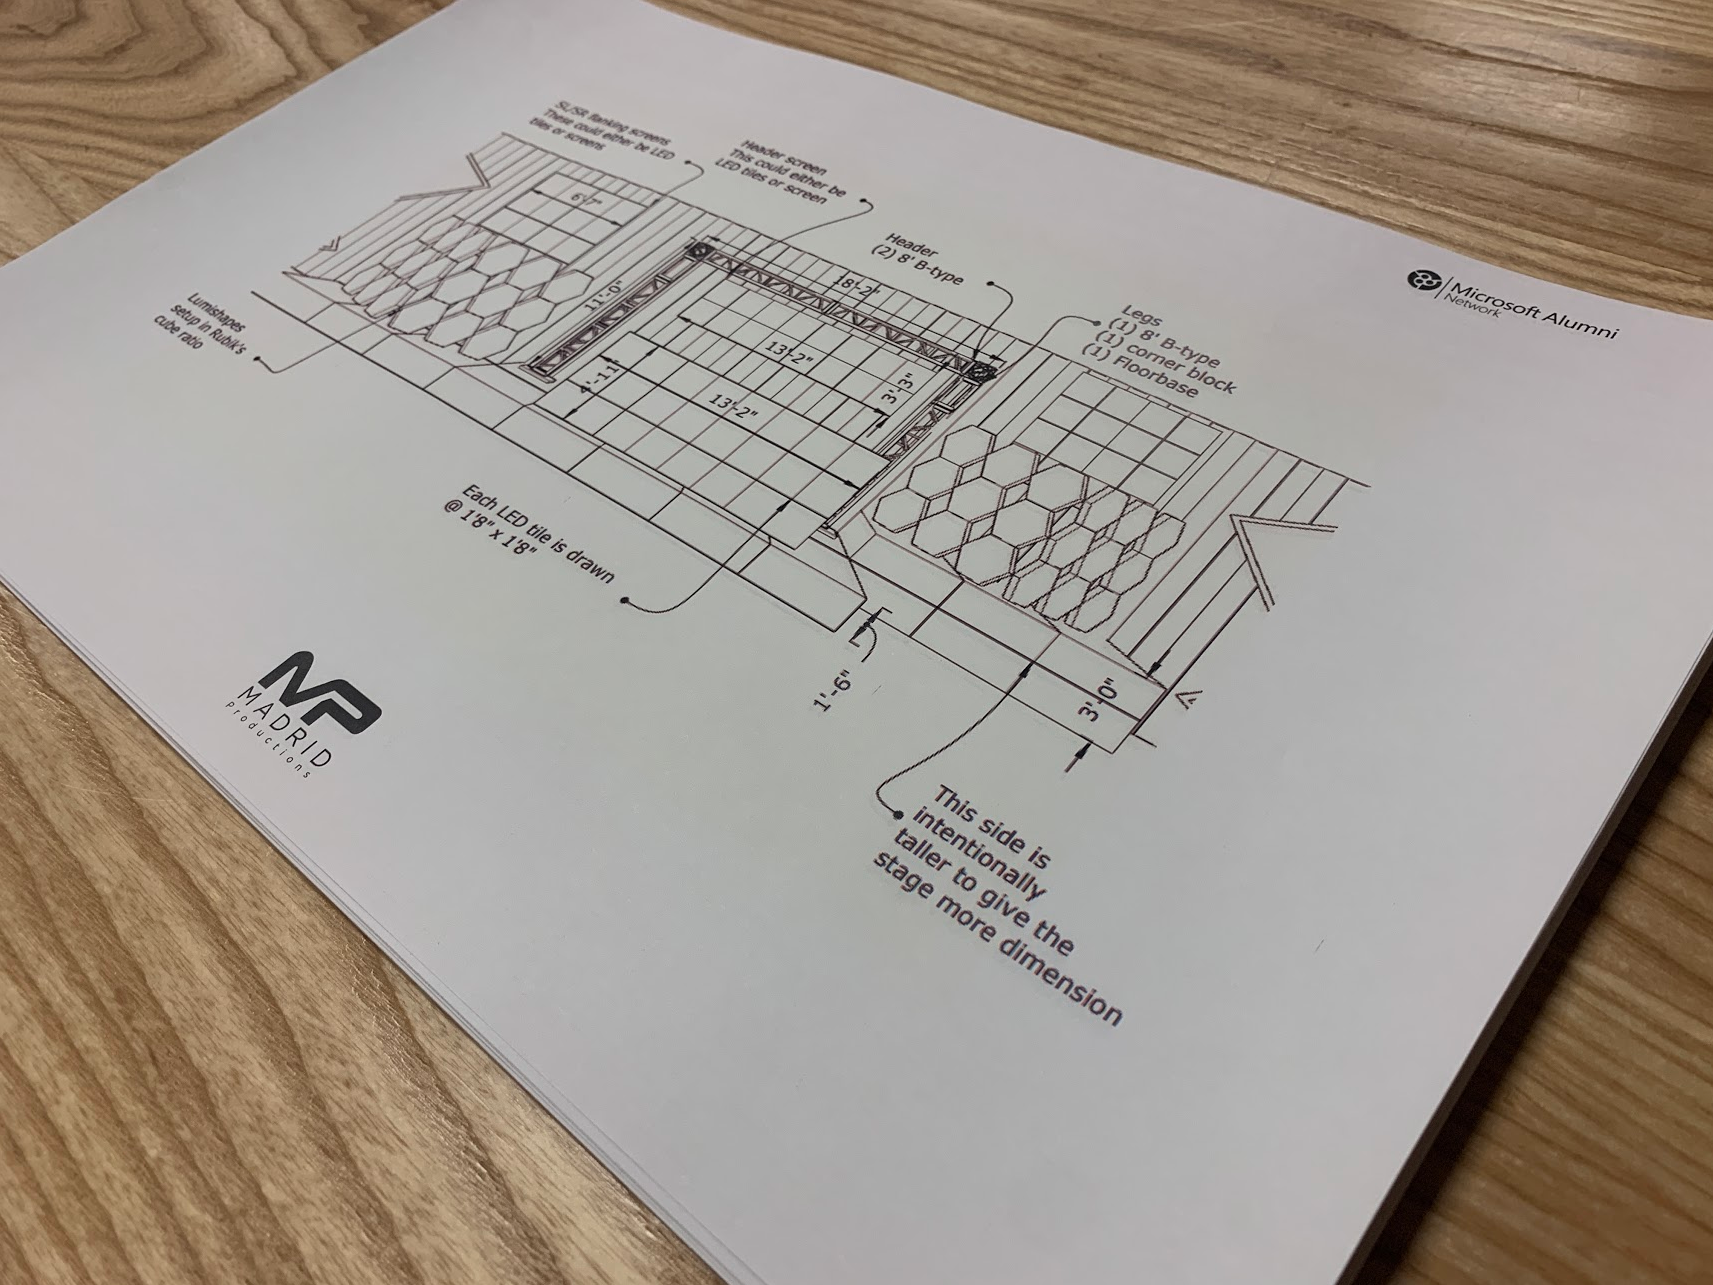 Plans for an LED wall on a stage.